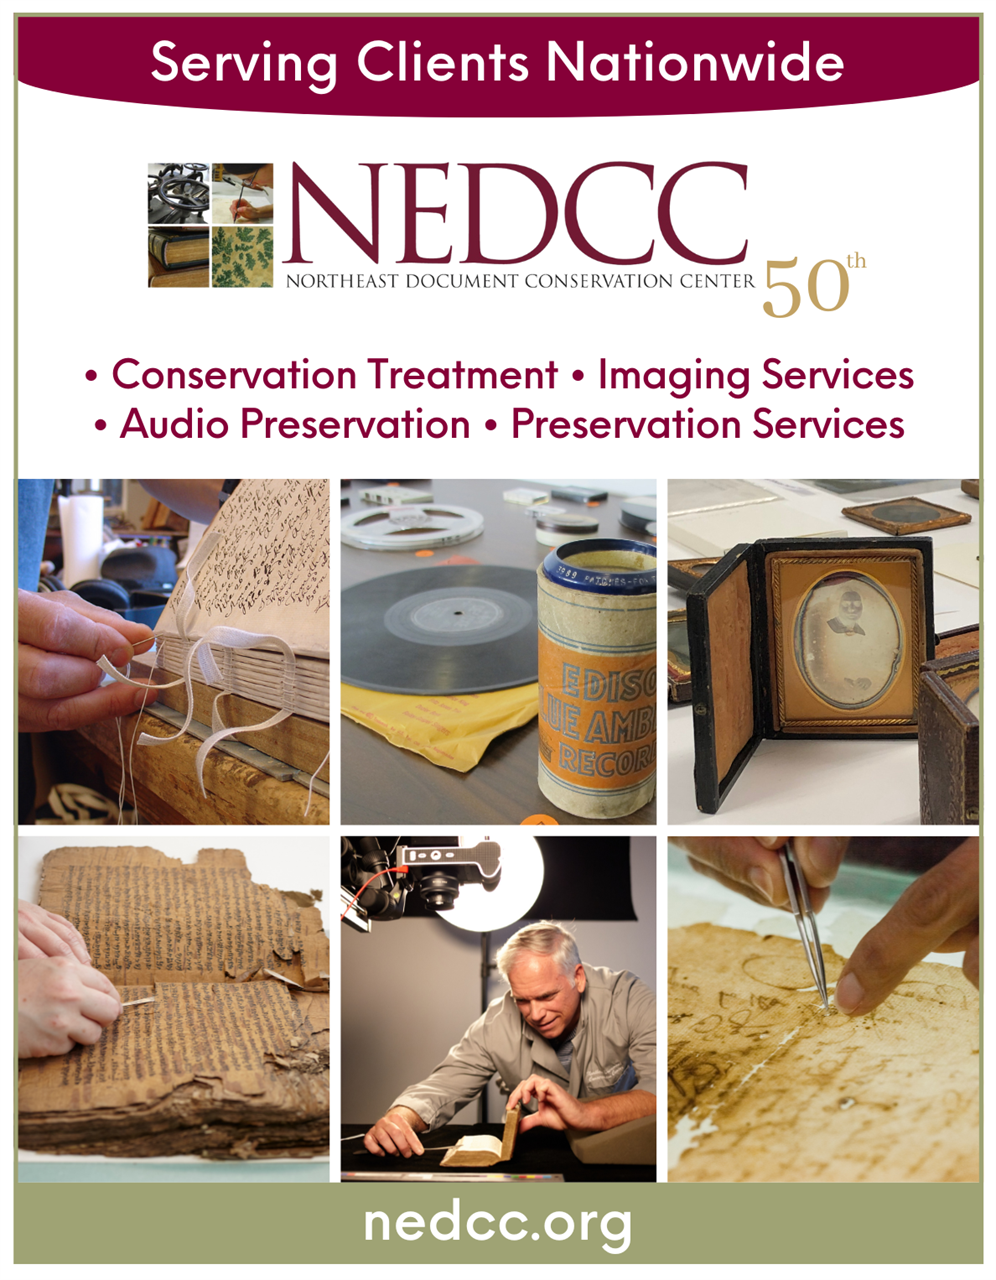 ad for Northeast Document Conservation Center. States they serve clients nationwide for conservation treatment, imaging services, audio preservation, and preservation services.